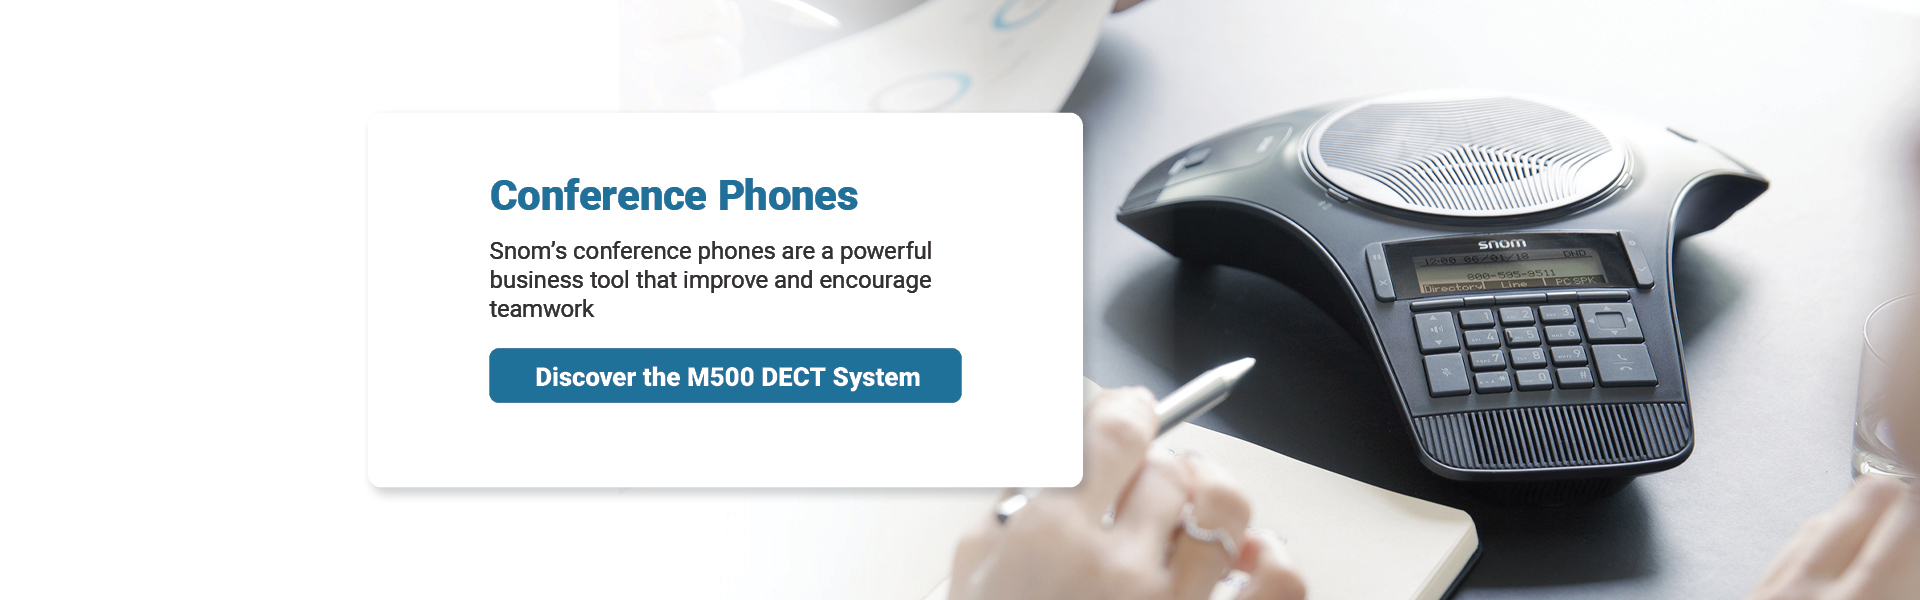 Conference Phones | Snom's conference phones are a powerful business tool that improve and encourage teamwork | Discover the M500 DECT System